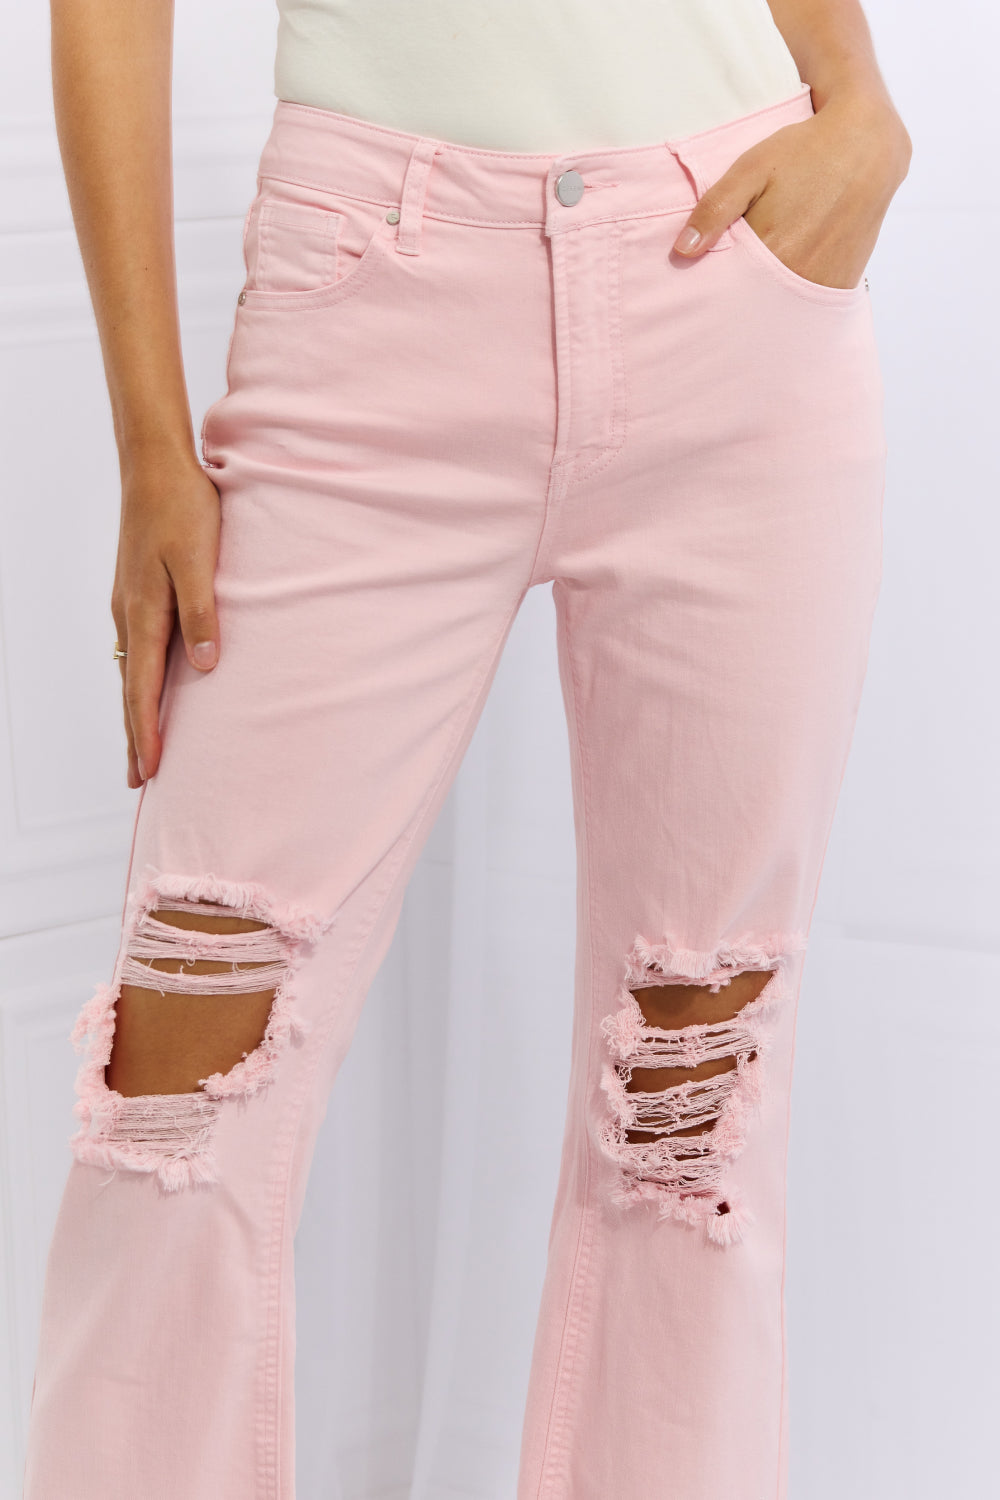 RISEN Miley Full Size Distressed Ankle Flare Jeans free shipping -Oh Em Gee Boutique